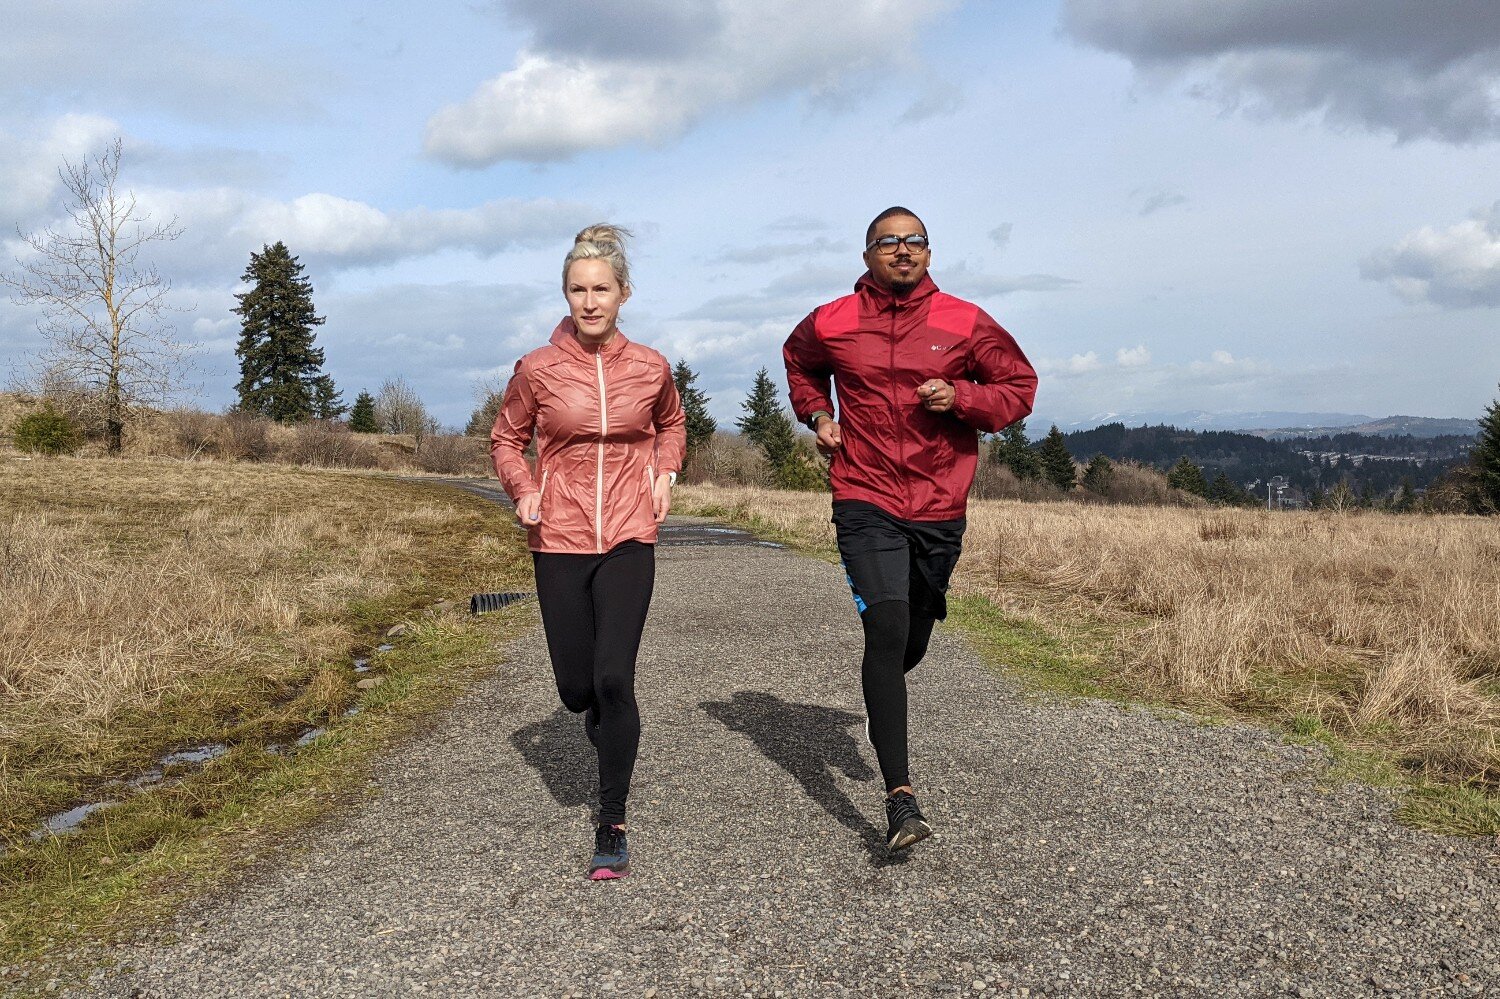 Breathable Windbreakers, like the Smartwool Merino Sport UL (men’s / women’s) and Columbia Flashback (men’s) are perfect for running